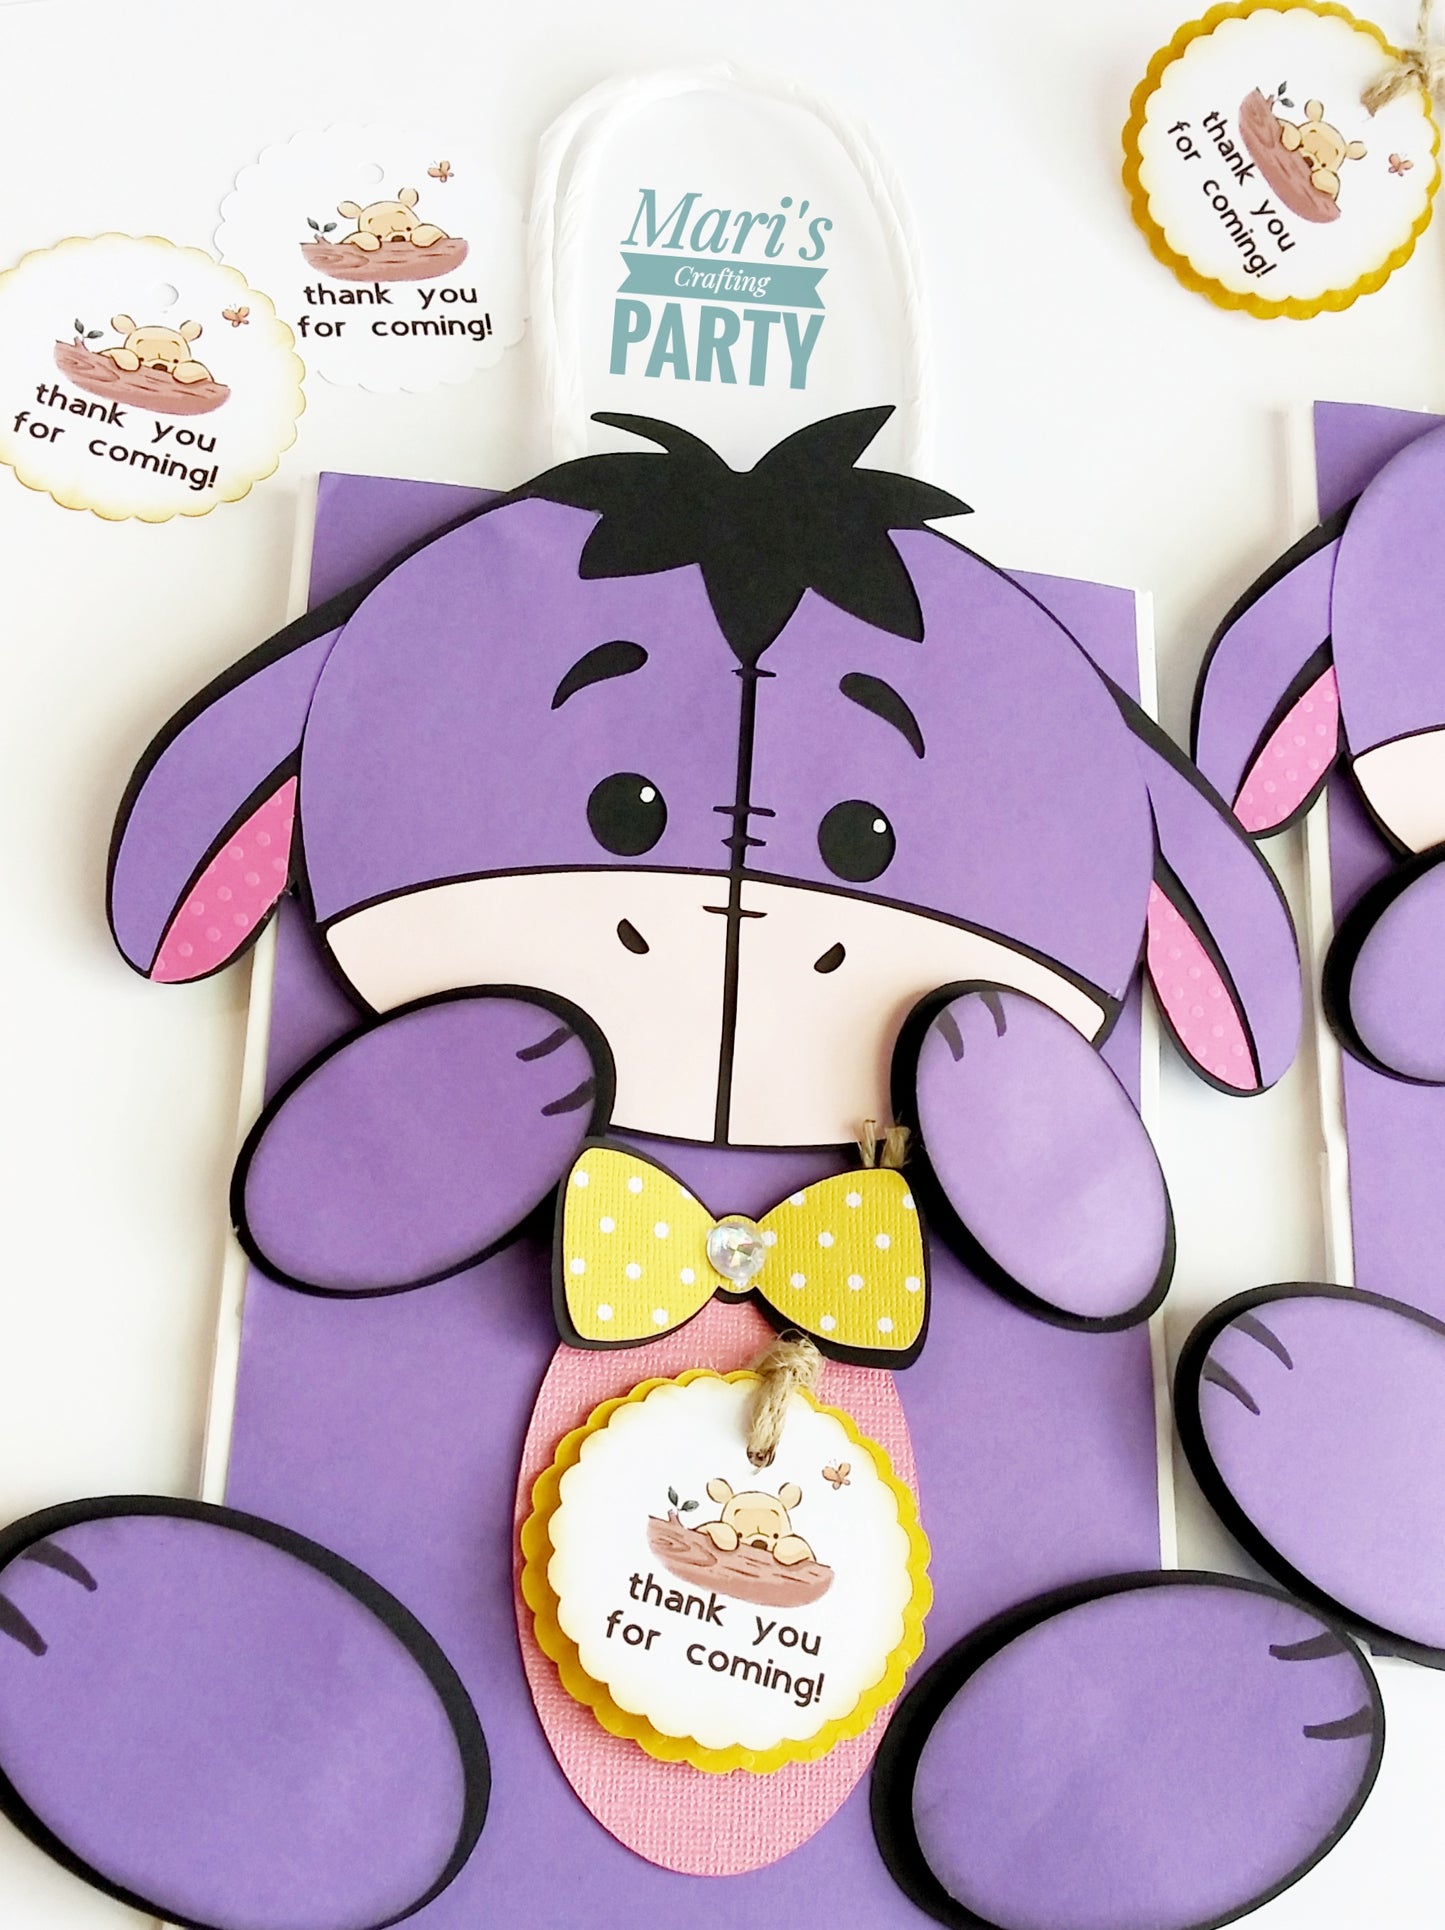 Custom Winnie the Pooh Themed Party Bags / 10 pcs.